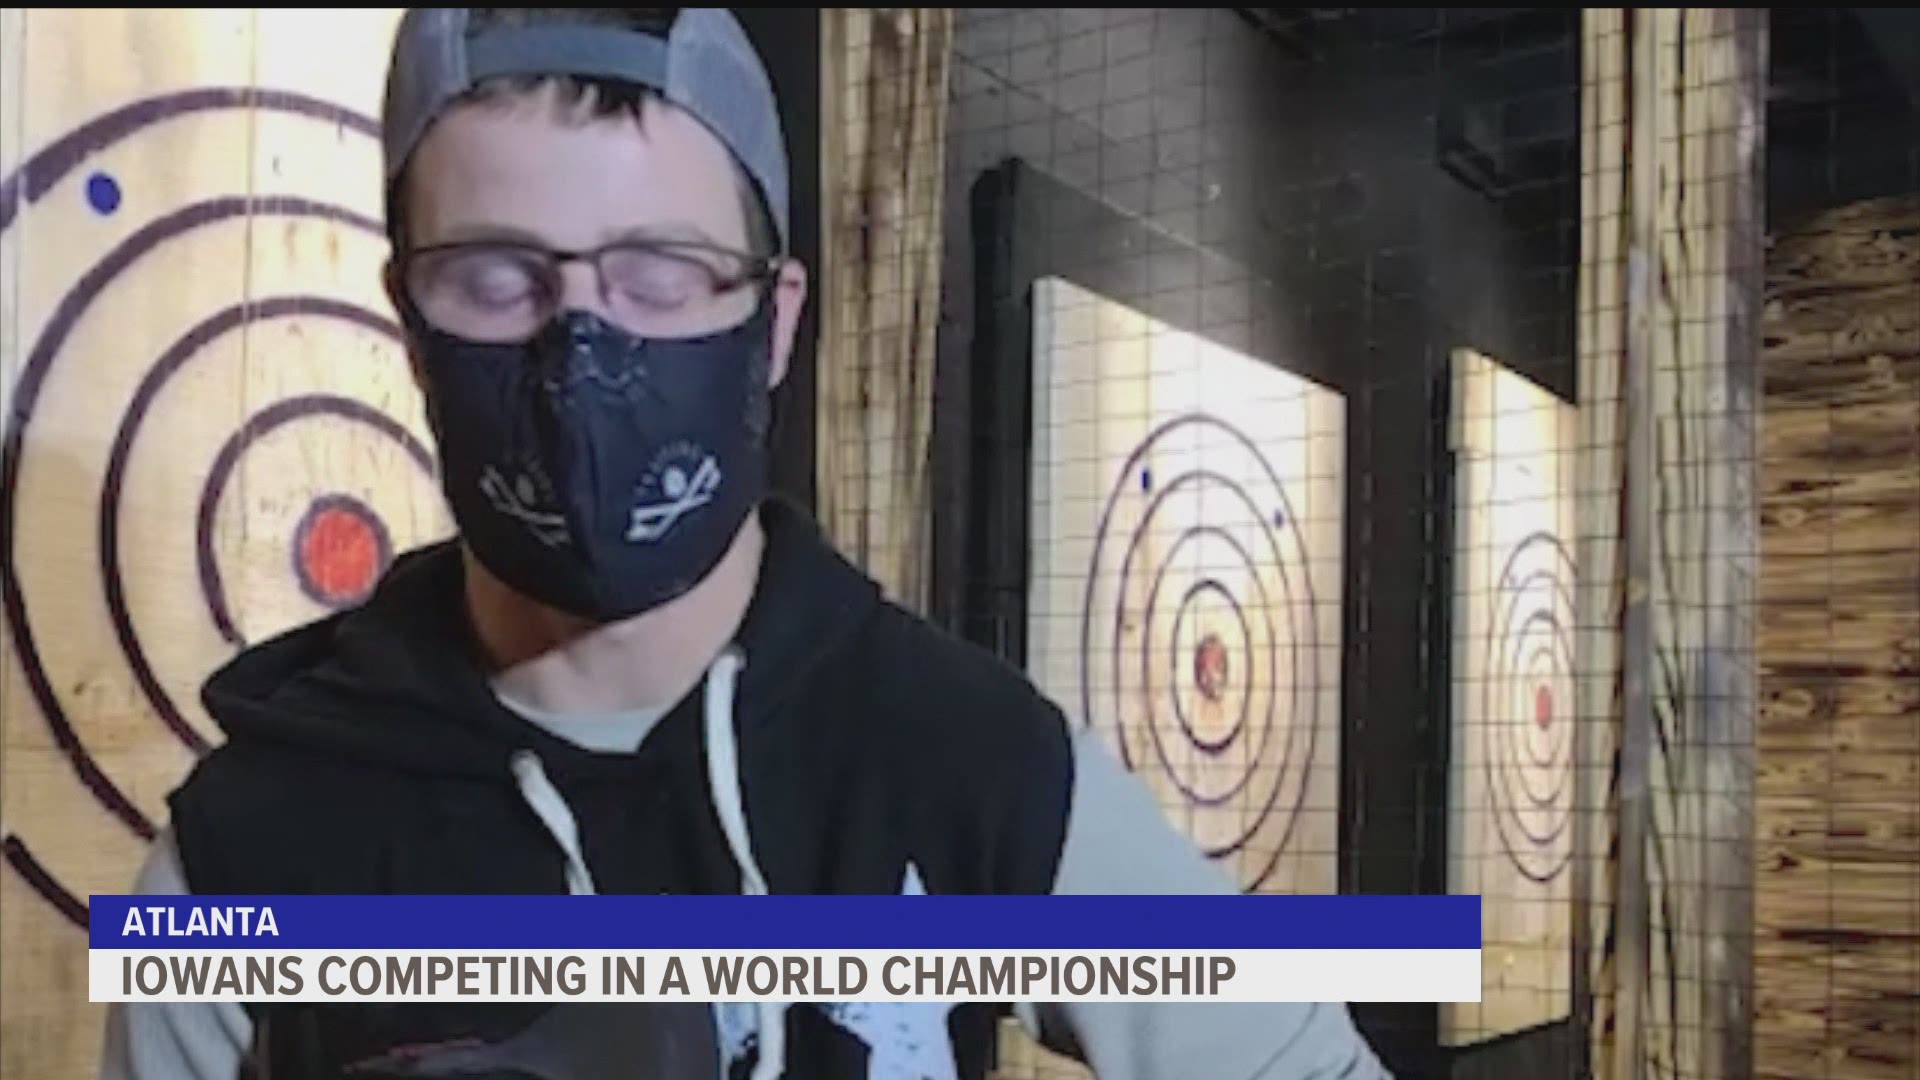 A handful of Iowans traveled to Atlanta to compete in a world championship.